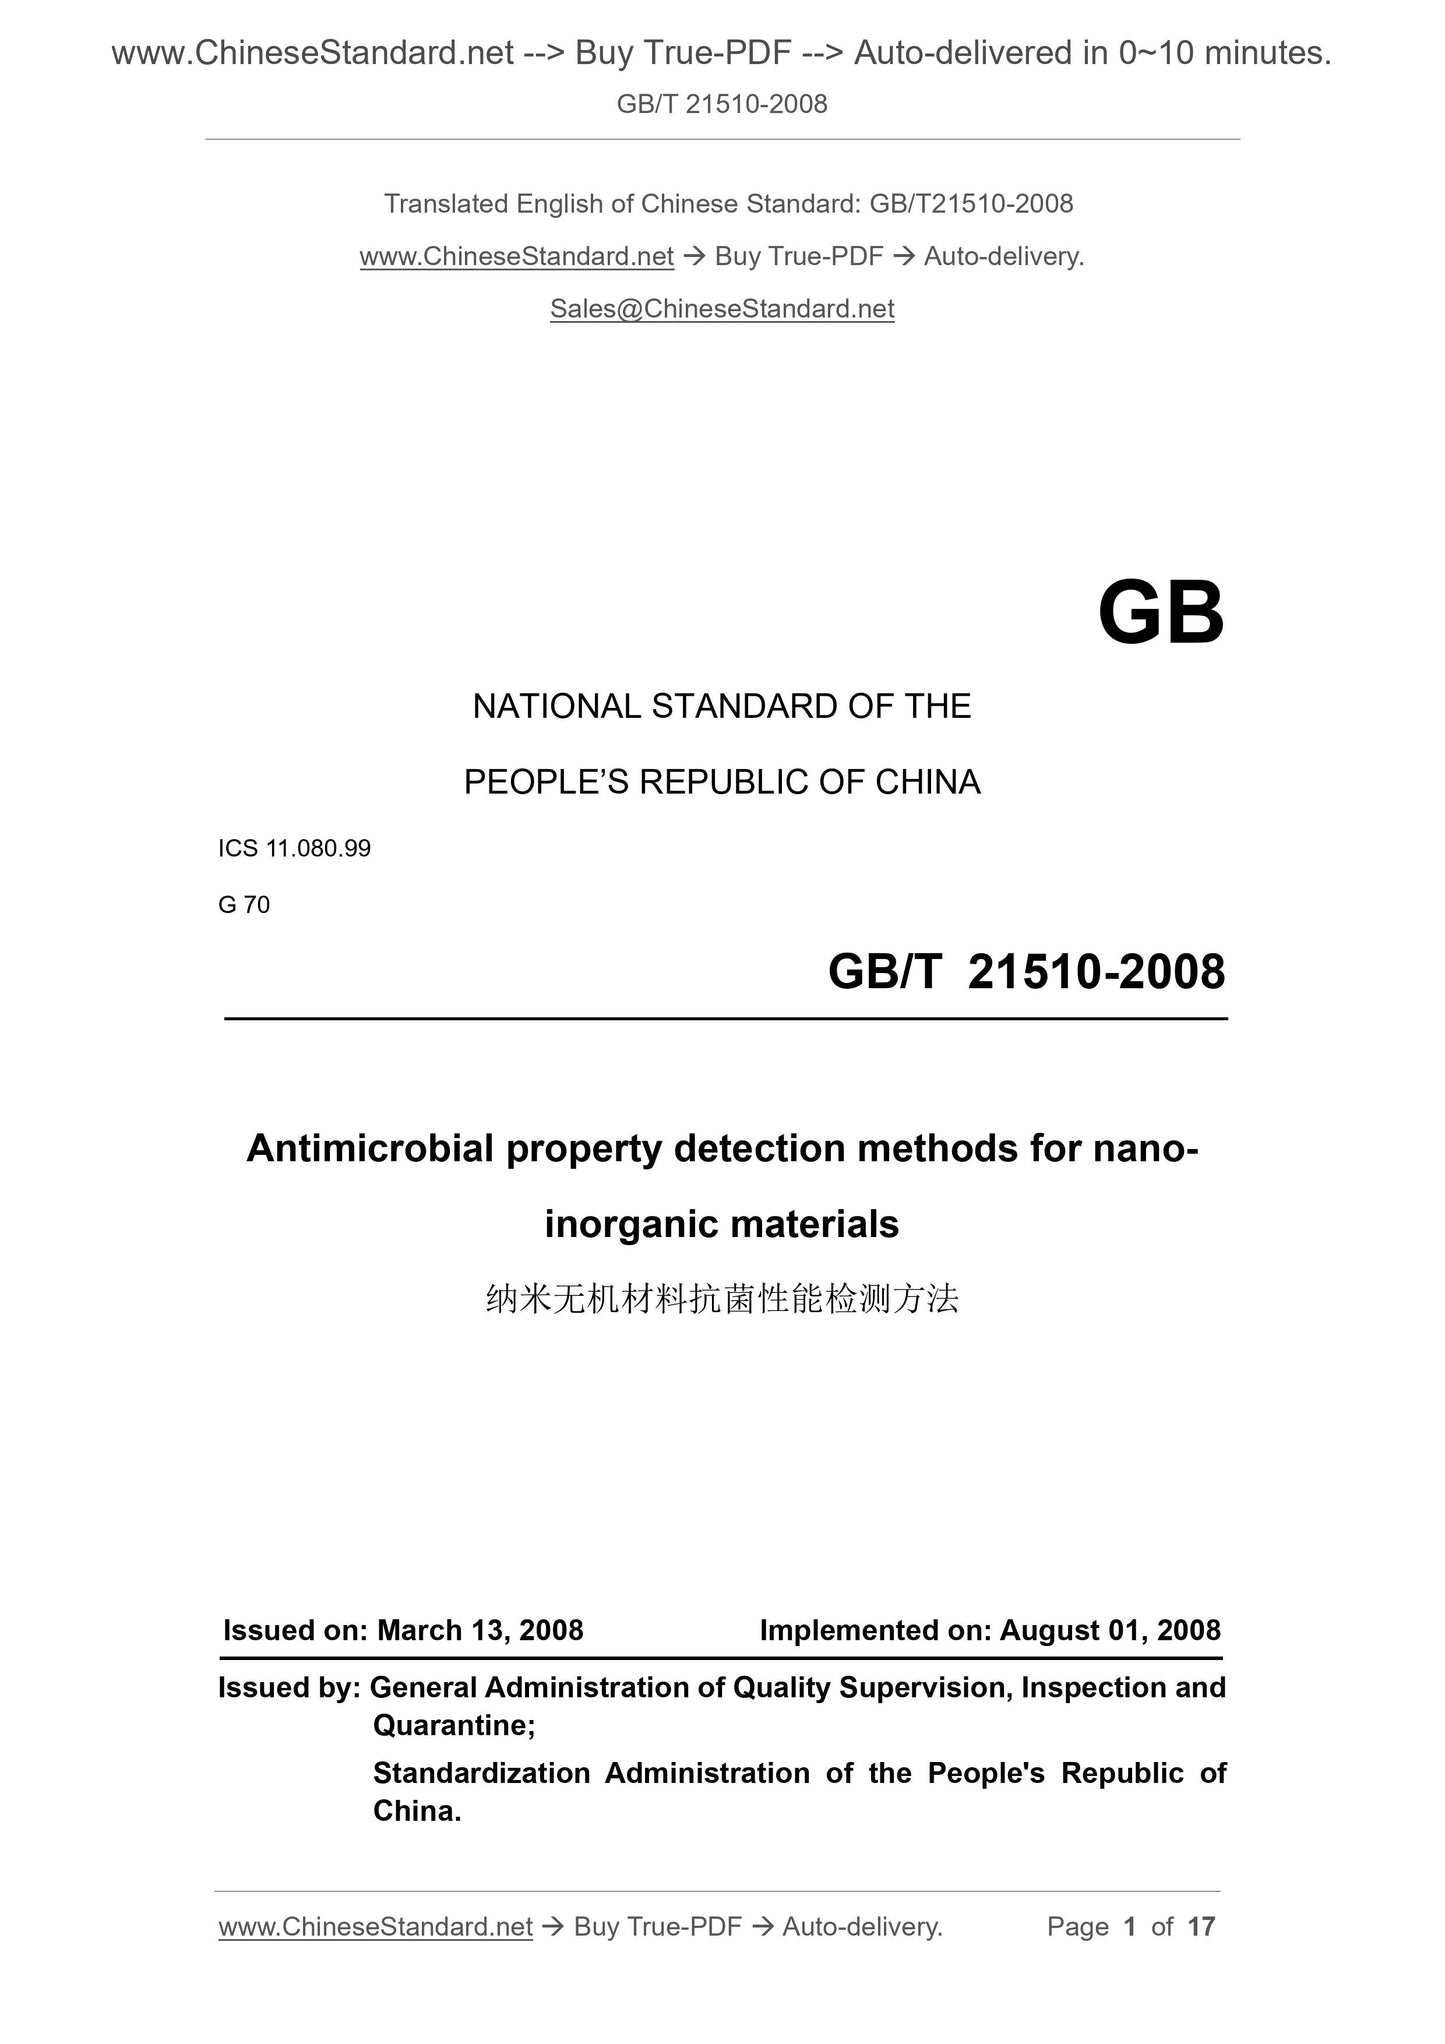 GB/T 21510-2008 Page 1